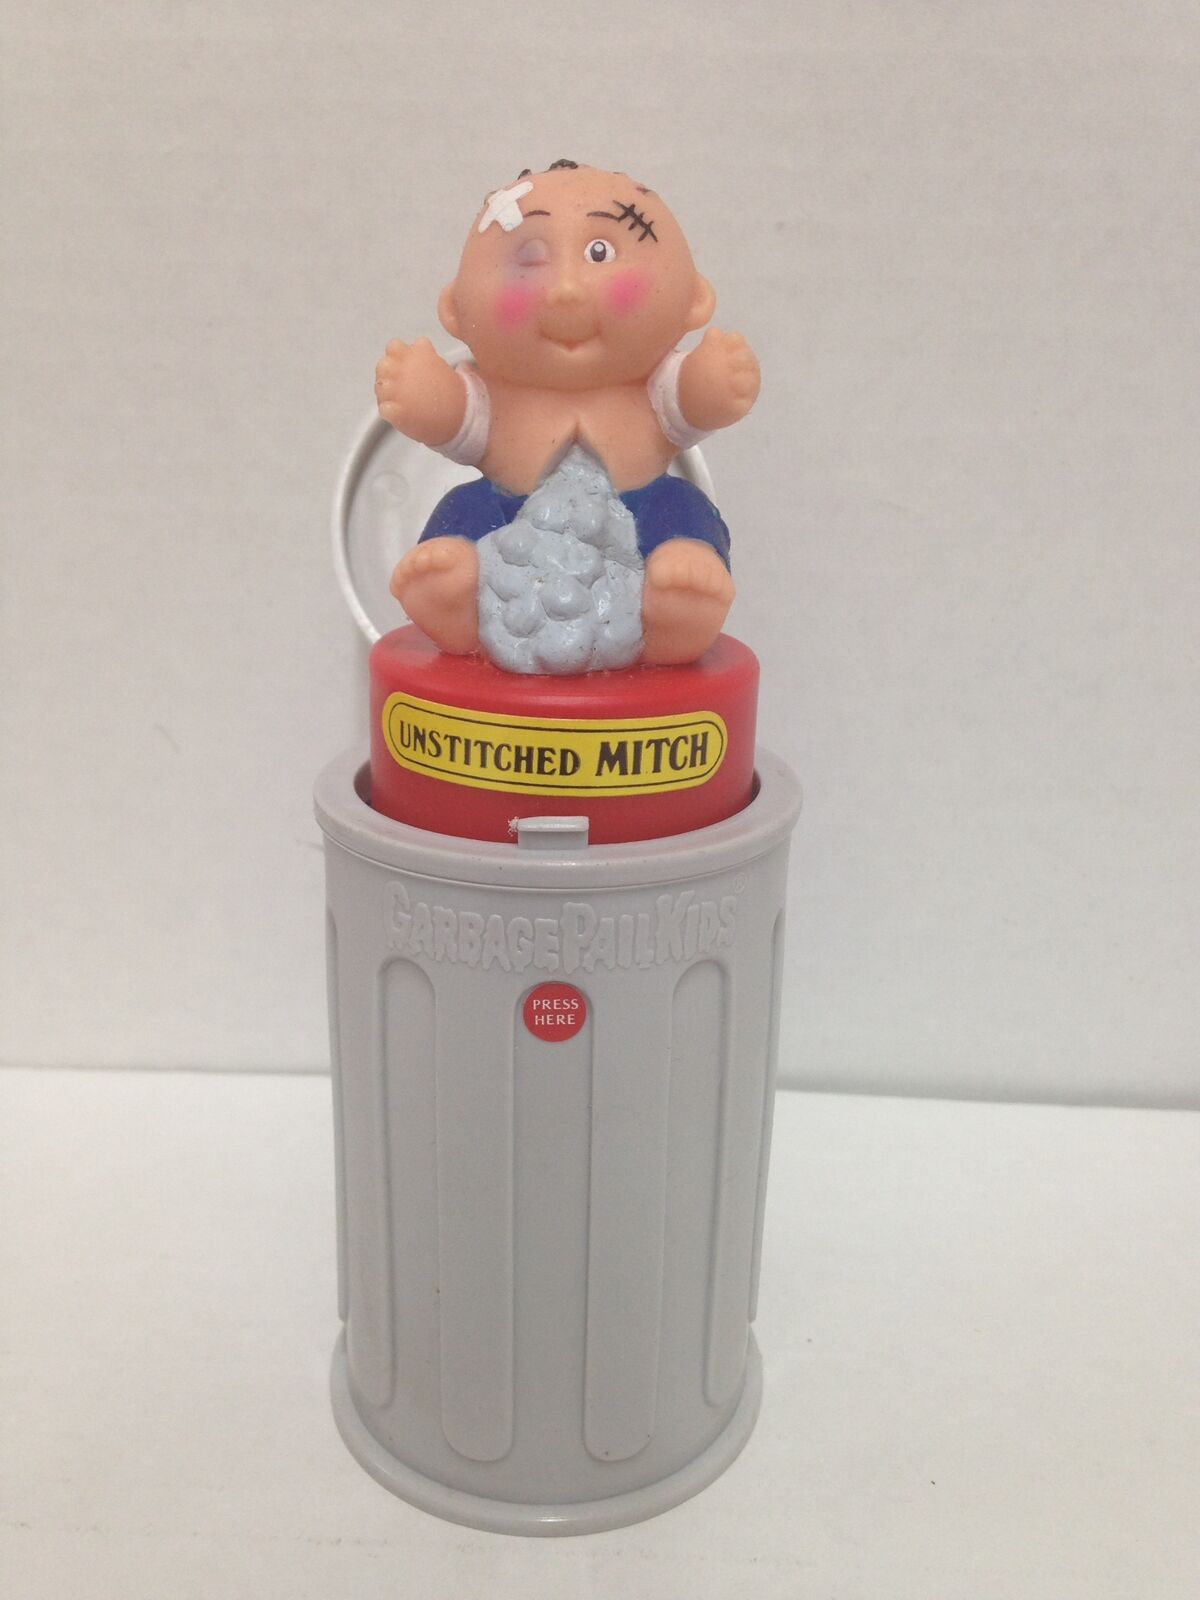 1985 Topps Imperial Toys GARBAGE PAIL KIDS UNSTITCHED MITCH Pop-Up GPK Image 1